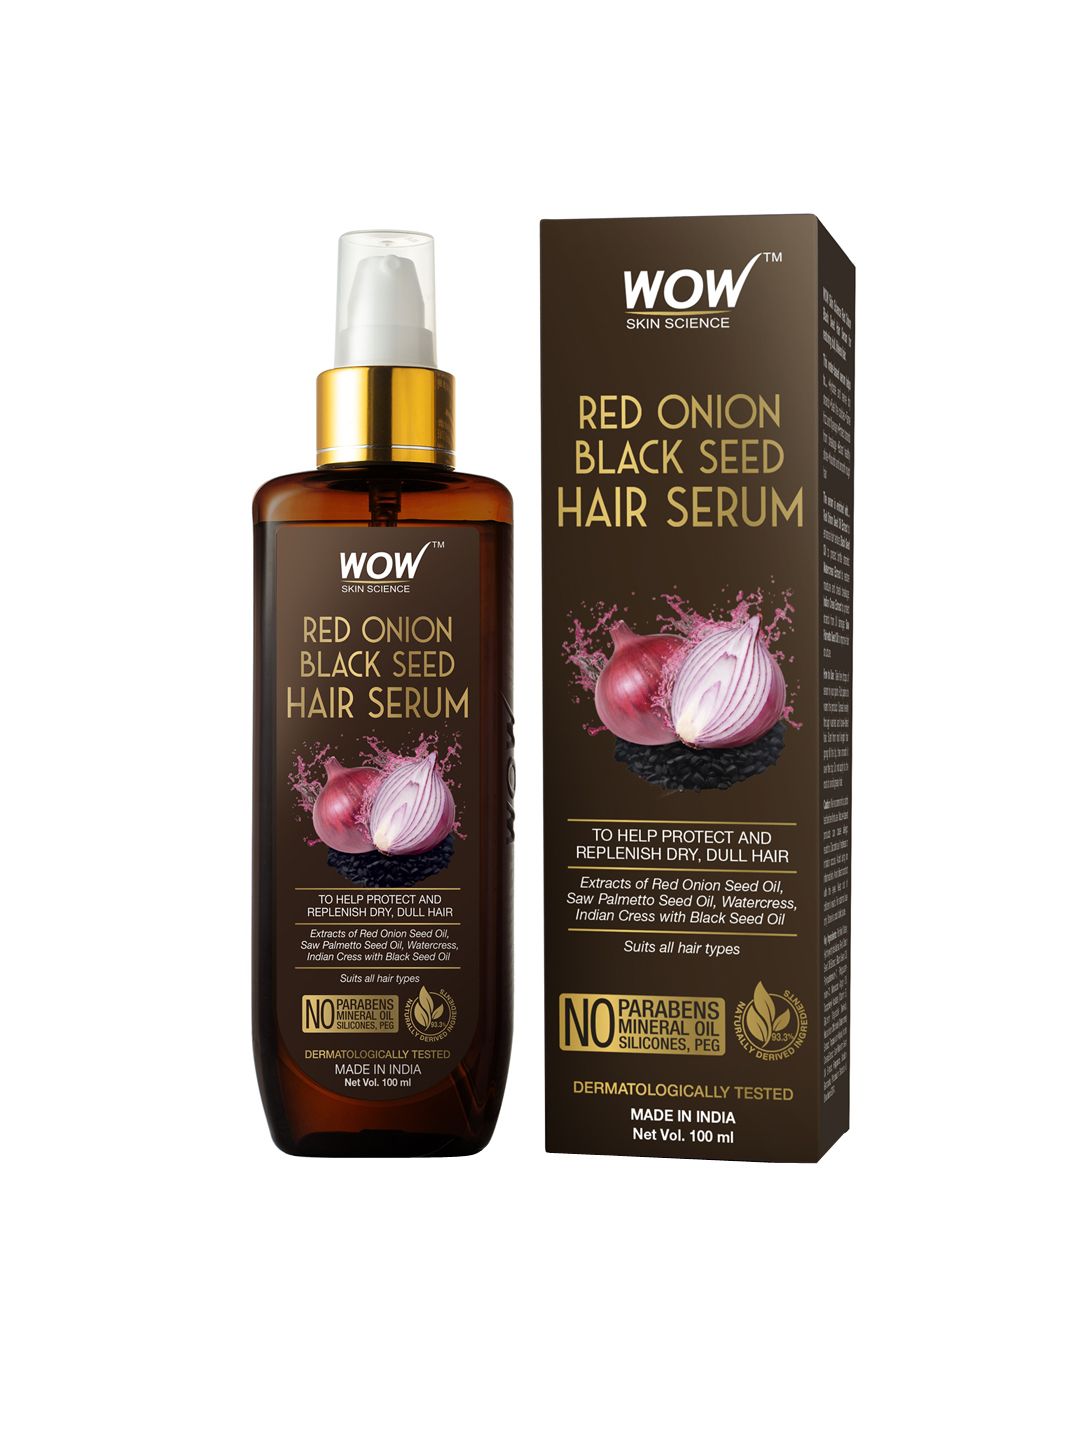 WOW SKIN SCIENCE Red Onion Black Seed Hair Serum - 100 ml Price in India